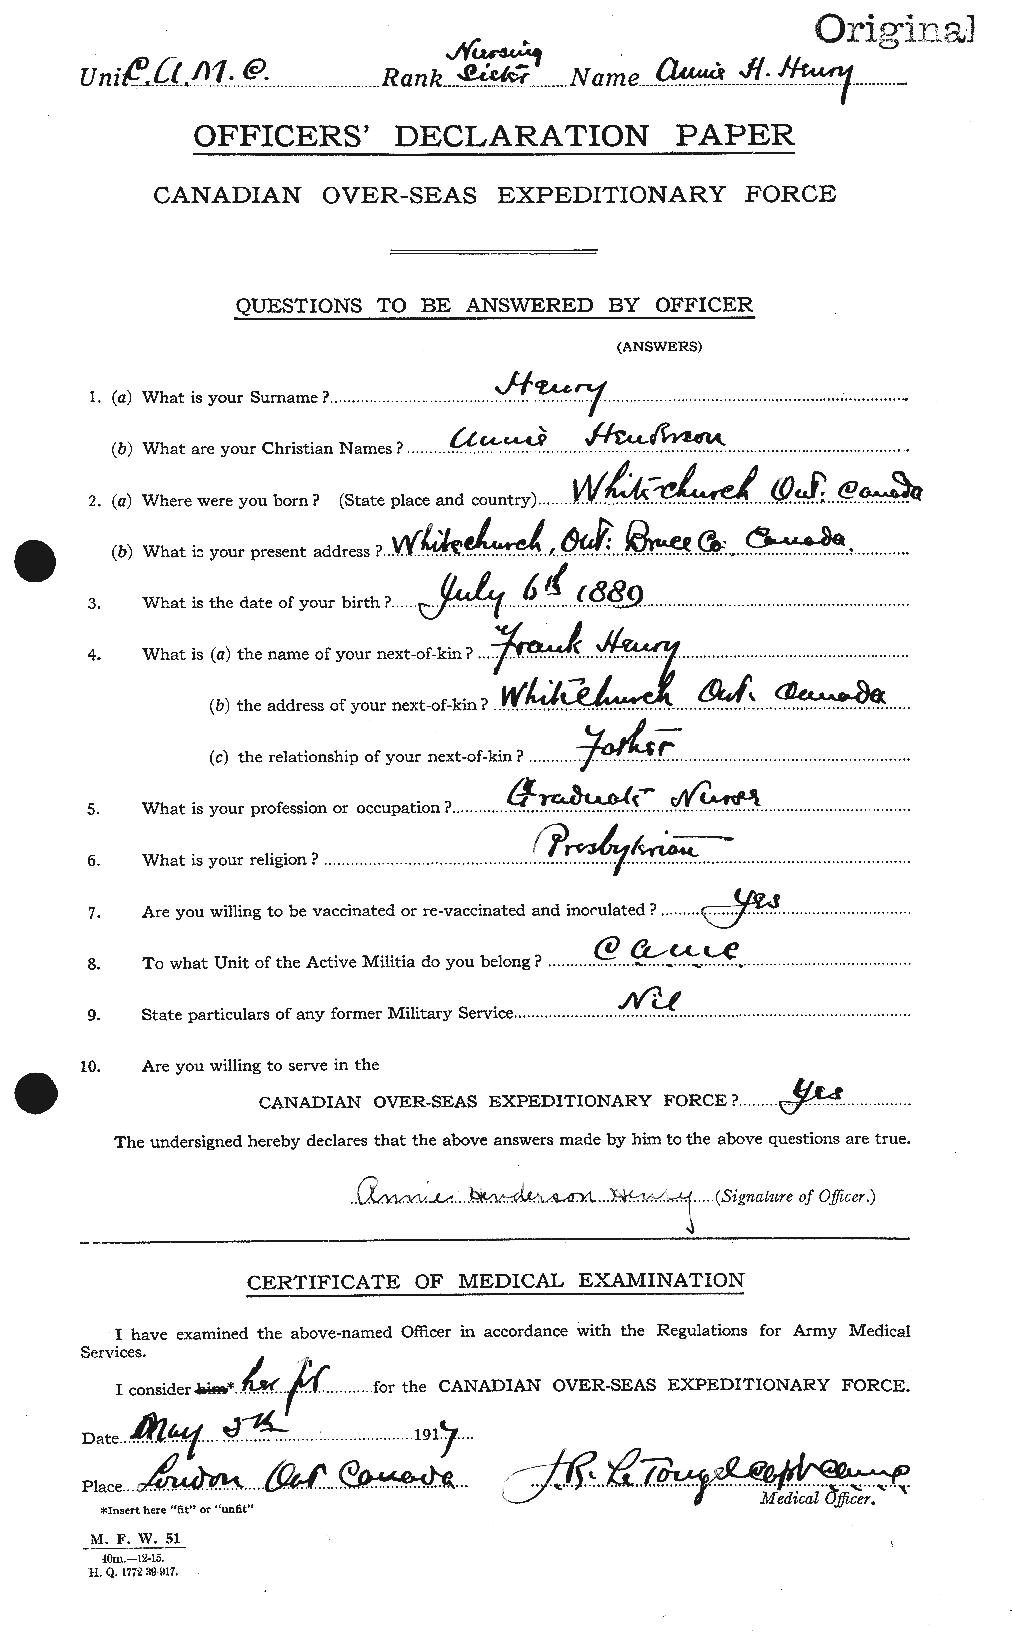 Personnel Records of the First World War - CEF 392778a